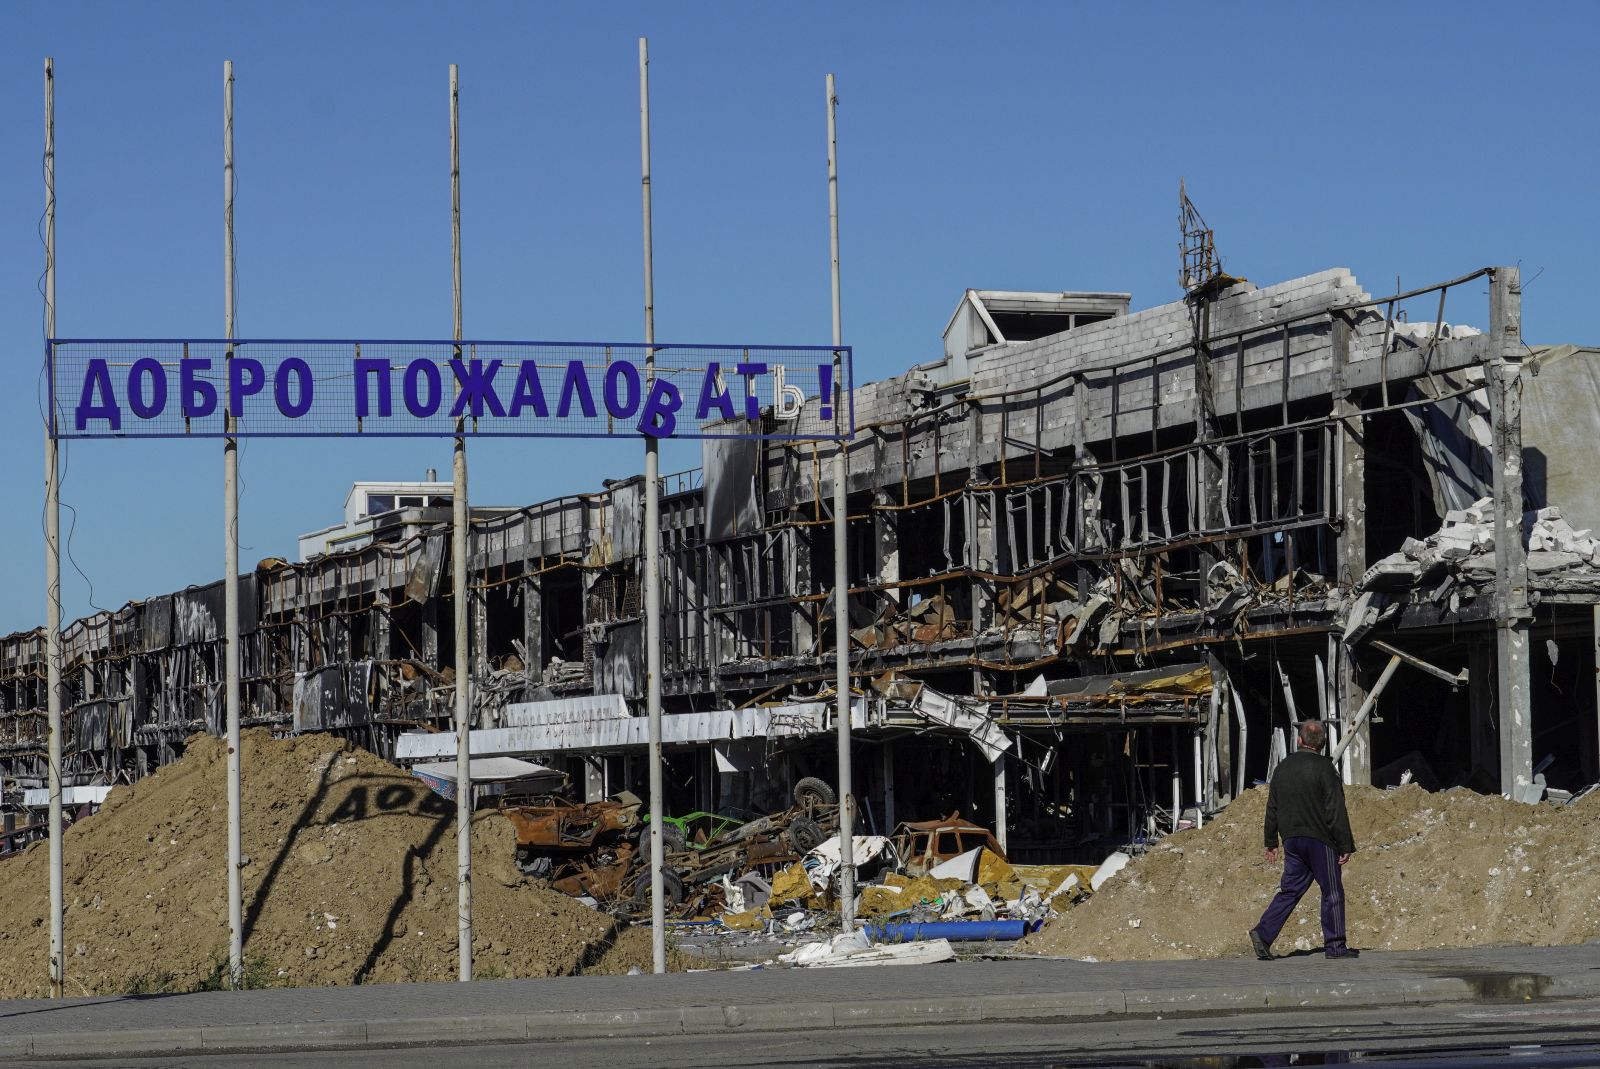 epa10206236 A man walks by a destroyed building near a sign reading 'Welcome', in Mariupol, eastern Ukraine, 25 September 2022. From 23 to 27 September, residents of the self-proclaimed Luhansk and Donetsk People's Republics as well as the Russian-controlled areas of the Kherson and Zaporizhzhia regions of Ukraine vote in a referendum to join the Russian Federation. On 24 February 2022 Russian troops entered the Ukrainian territory in what the Russian president declared a 'Special Military Operation', starting an armed conflict that has provoked destruction and a humanitarian crisis.  EPA/STRINGER